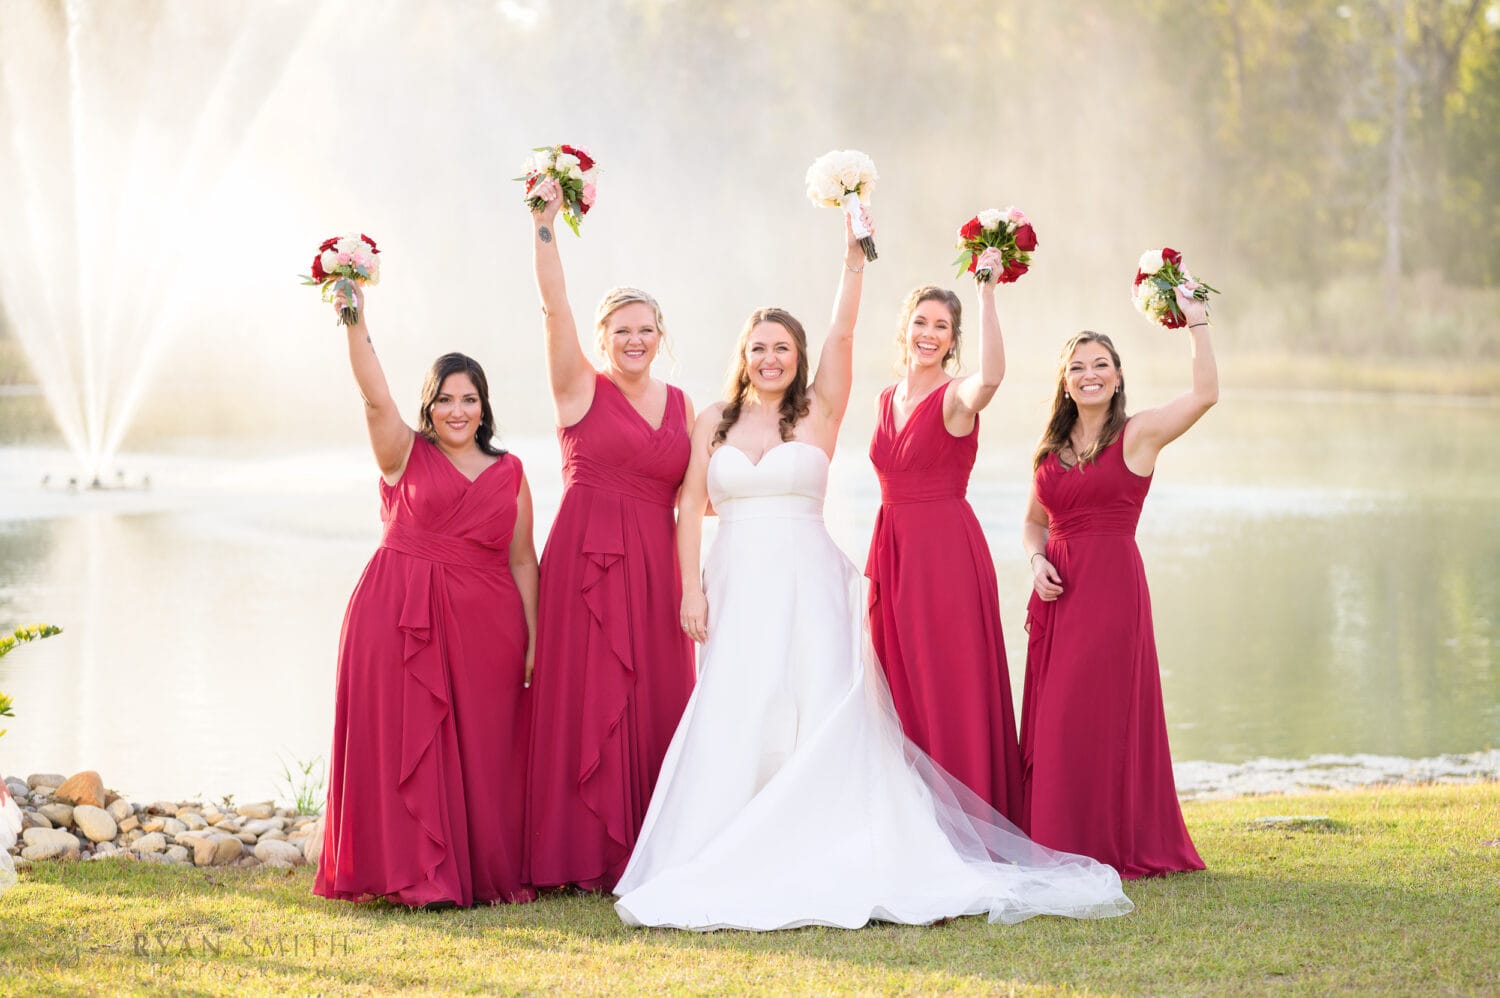 Bridesmaids holding flowers in the air - The Venue at White Oaks Farm